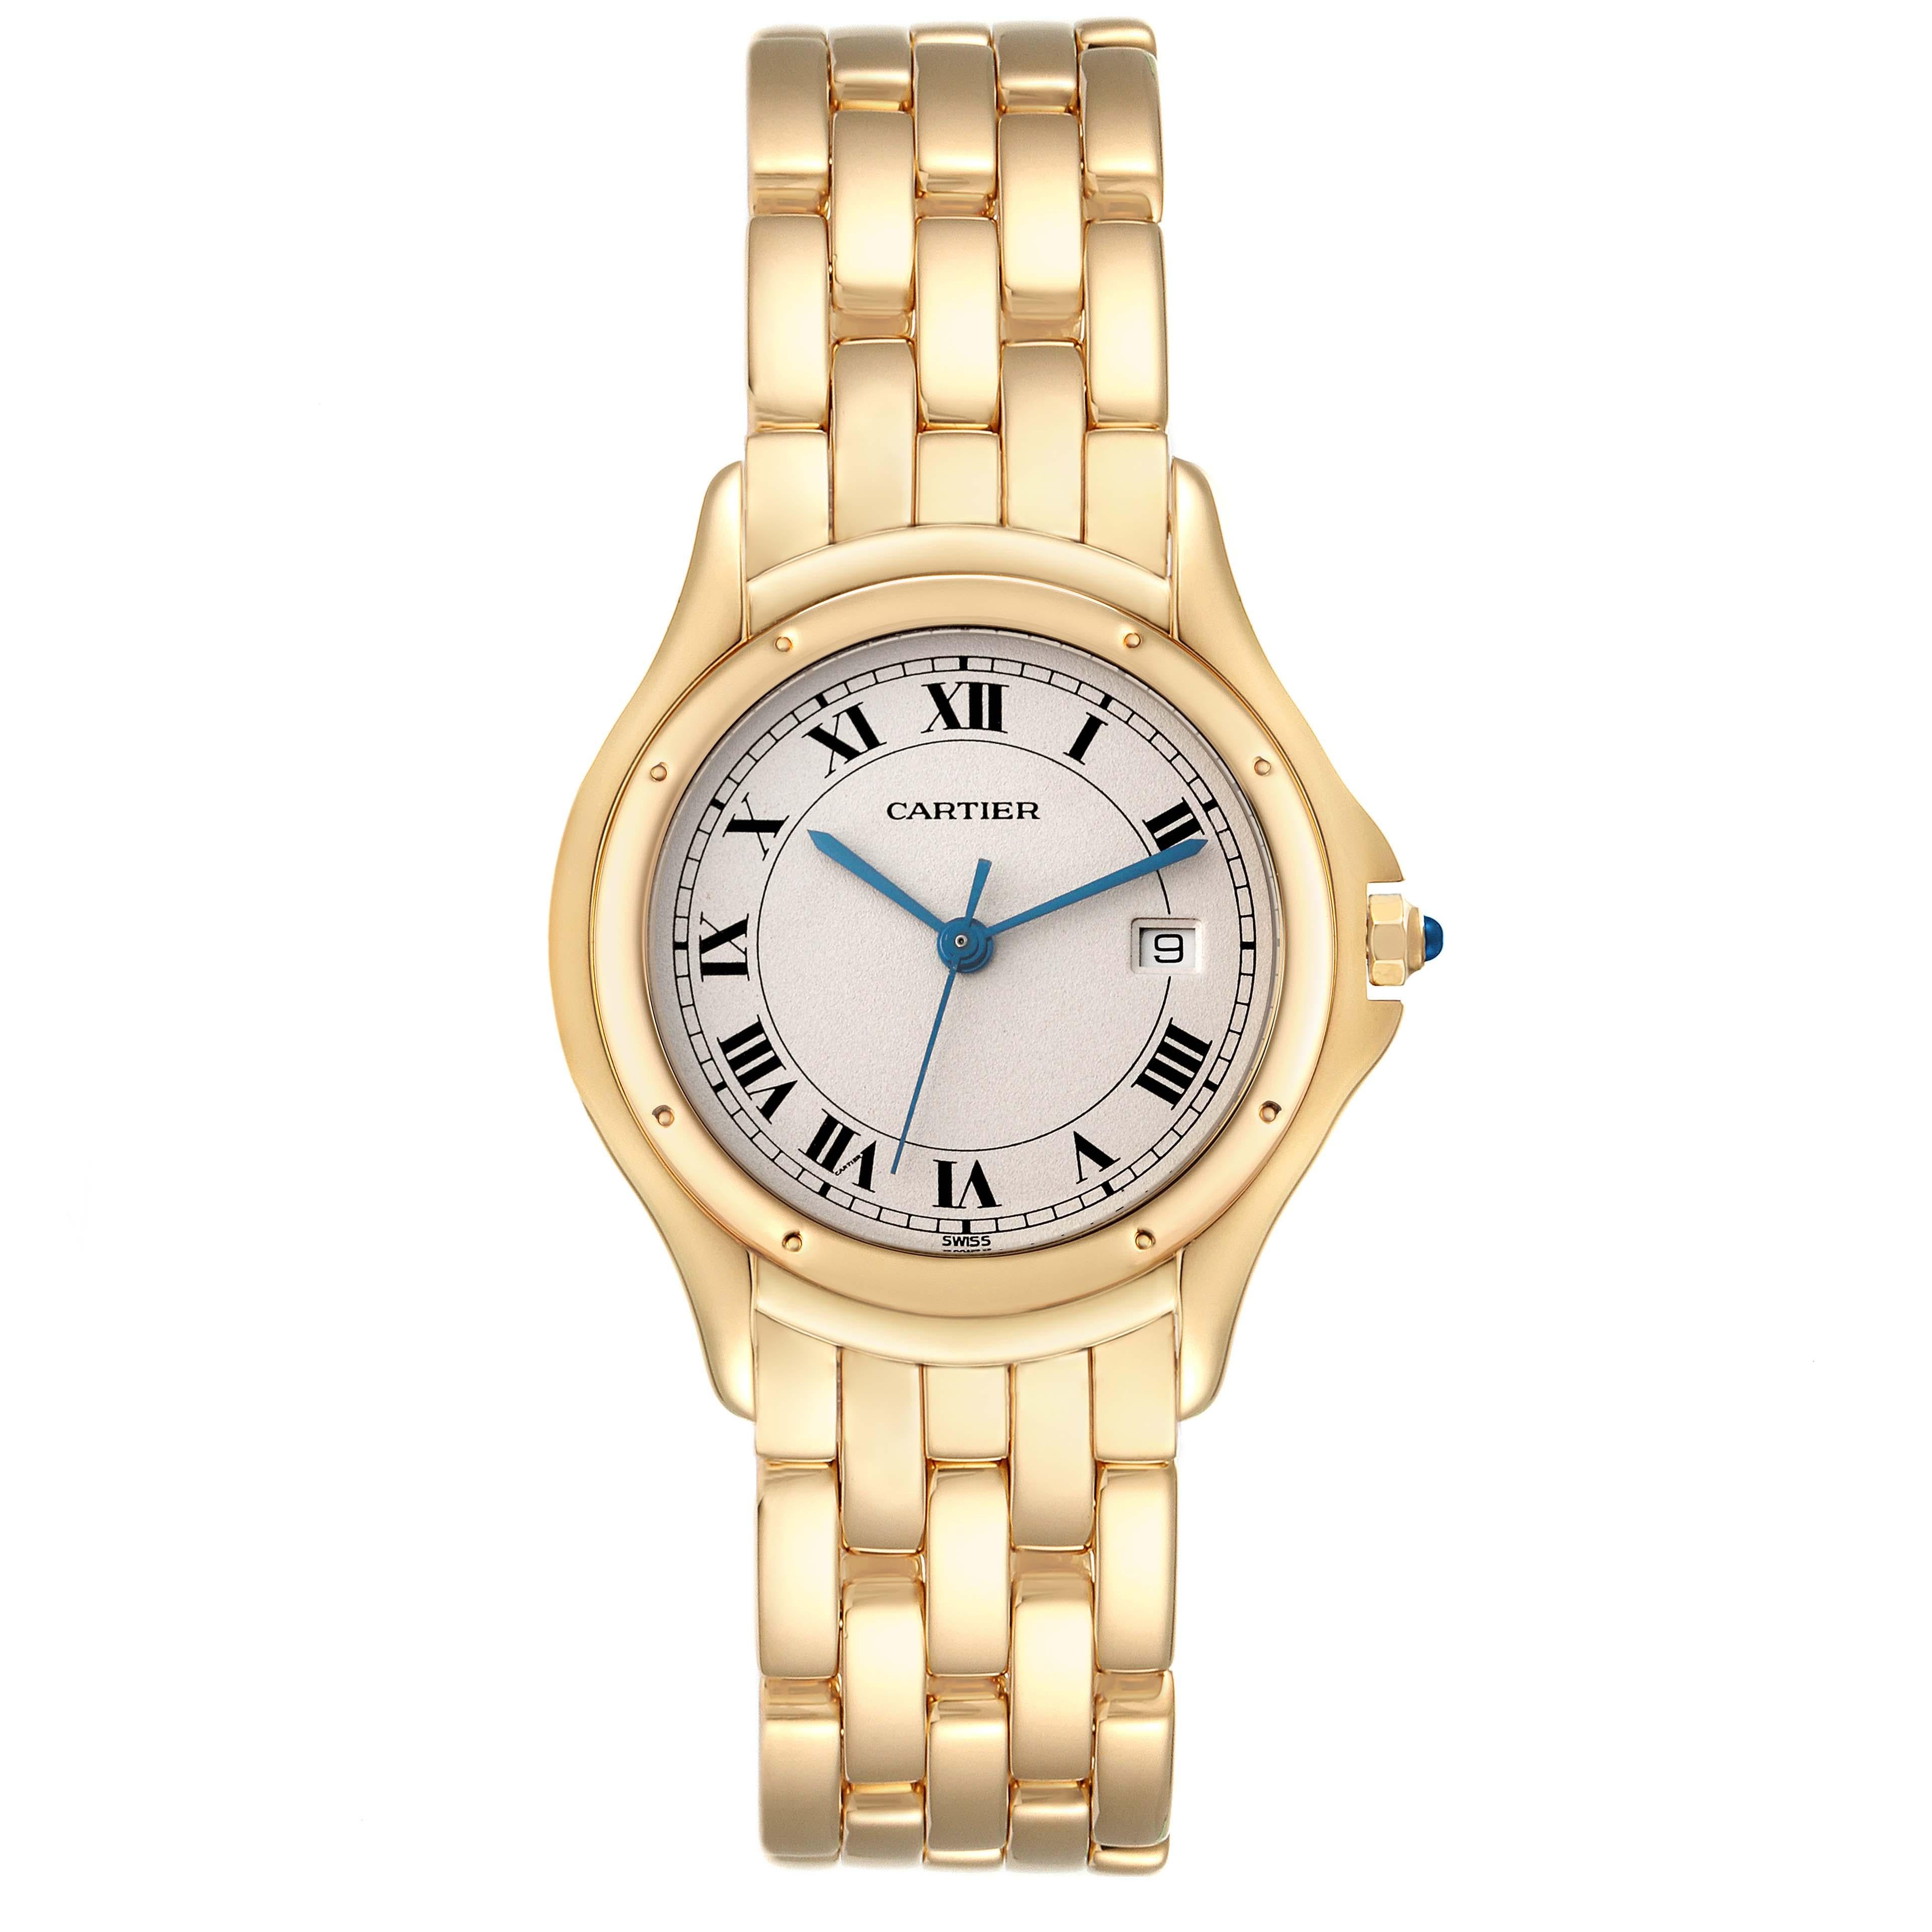 Cartier Cougar Yellow Gold Silver Dial Ladies Watch 887904. Quartz movement. 18k yellow gold round case 33 mm in diameter. Octagonal crown set with a blue sapphire cabochon. 18k yellow gold polished bezel, secured with 8 pins. Scratch resistant